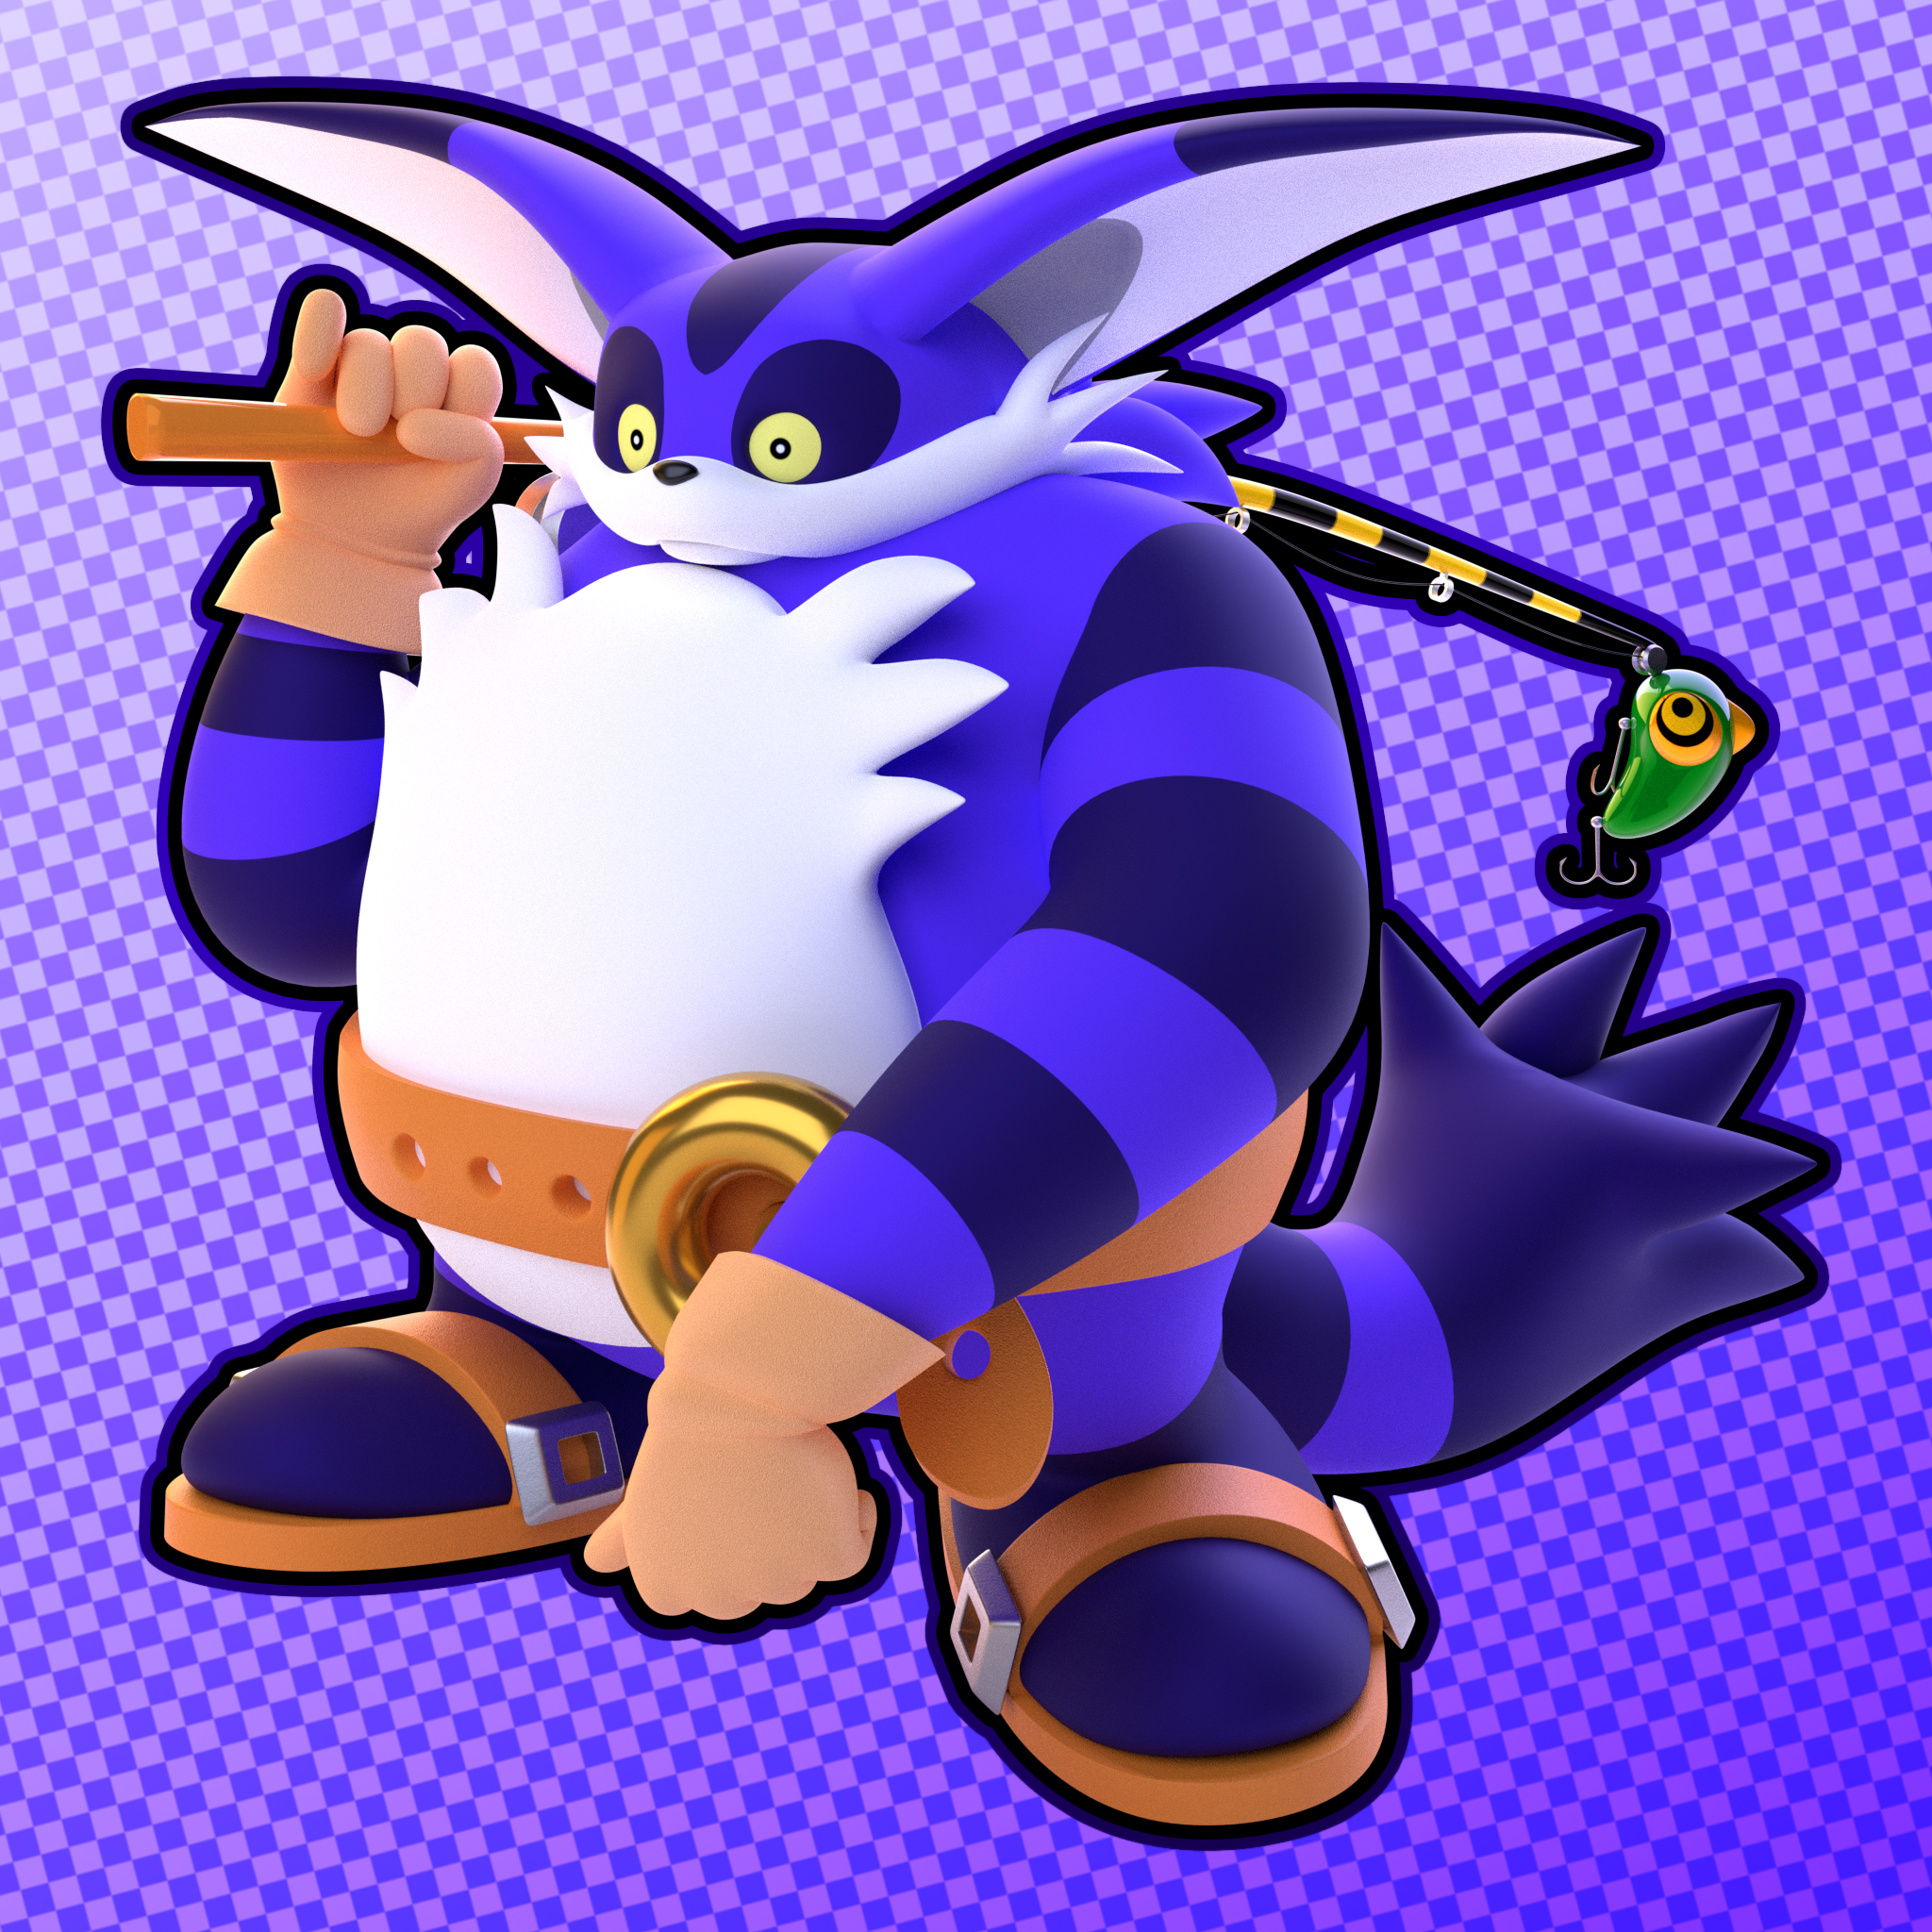 big and metal sonic by AmyRose2031 on DeviantArt